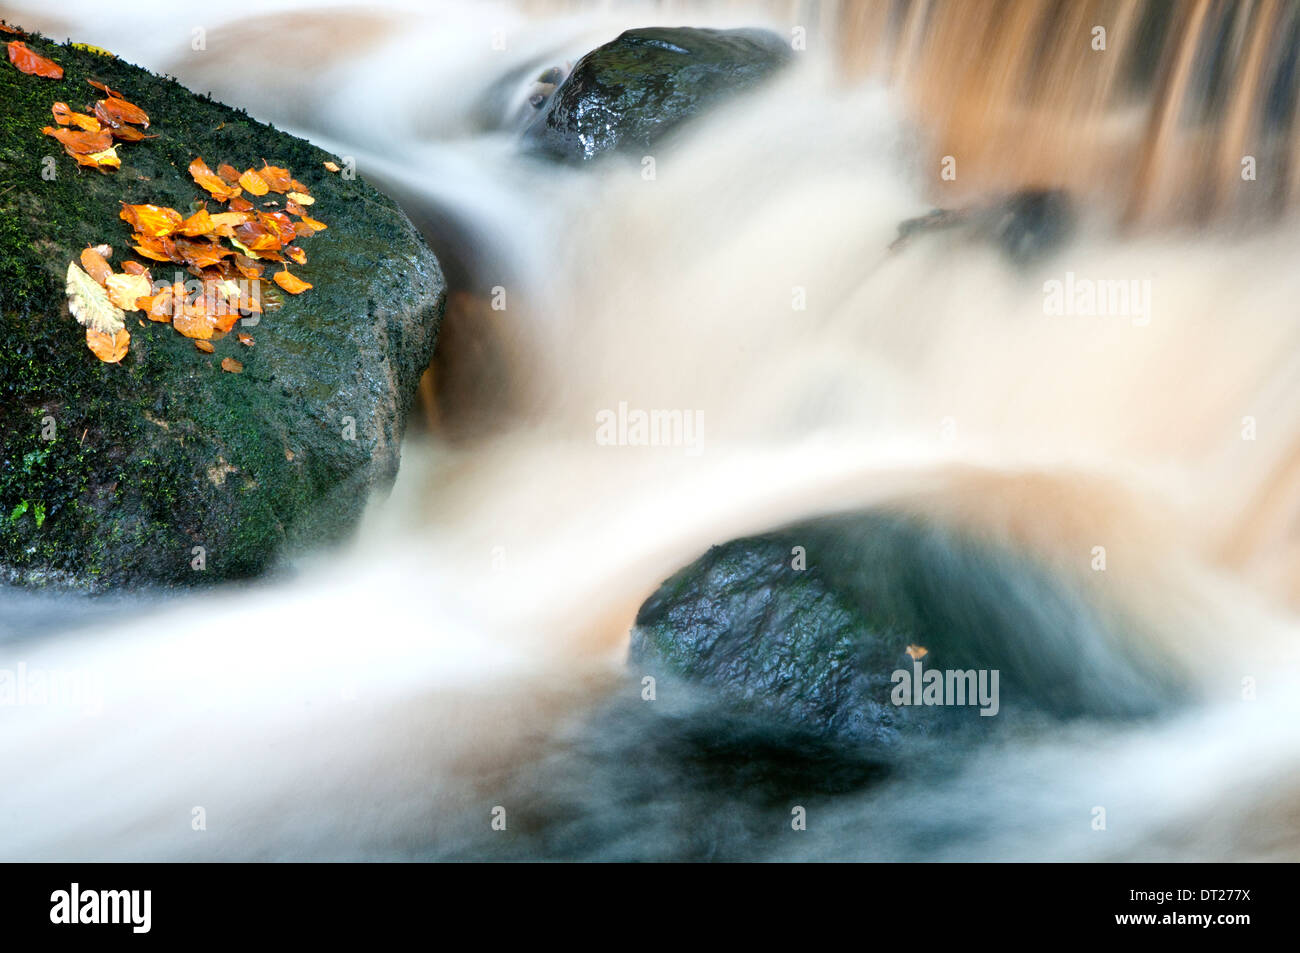 Flowing River with Autumn Leaves and Rocks Stock Photo